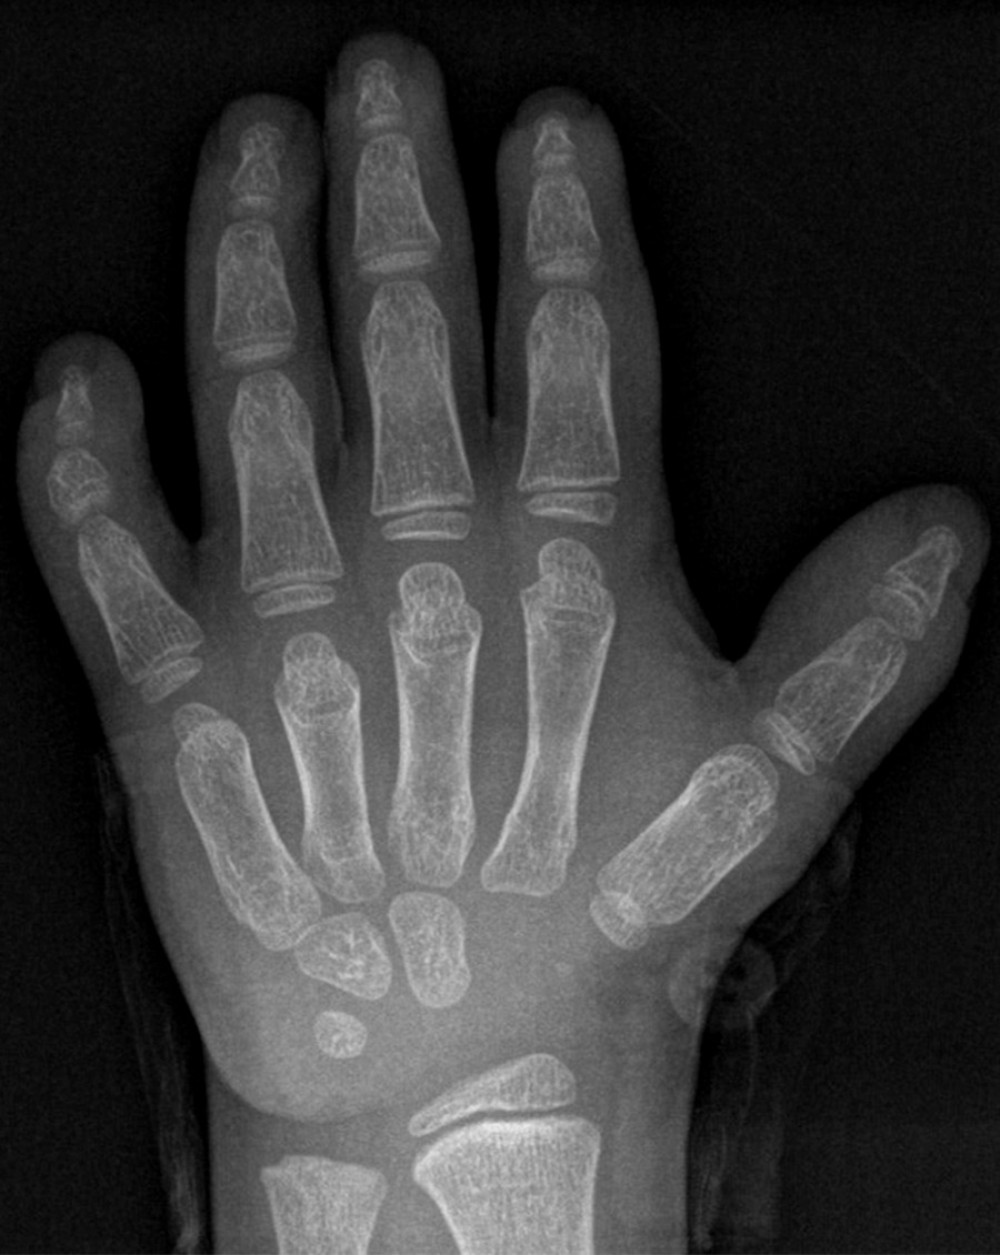 Frontal left-hand radiograph showing small middle phalanx of the little finger causing shortening and curvature of the little finger.